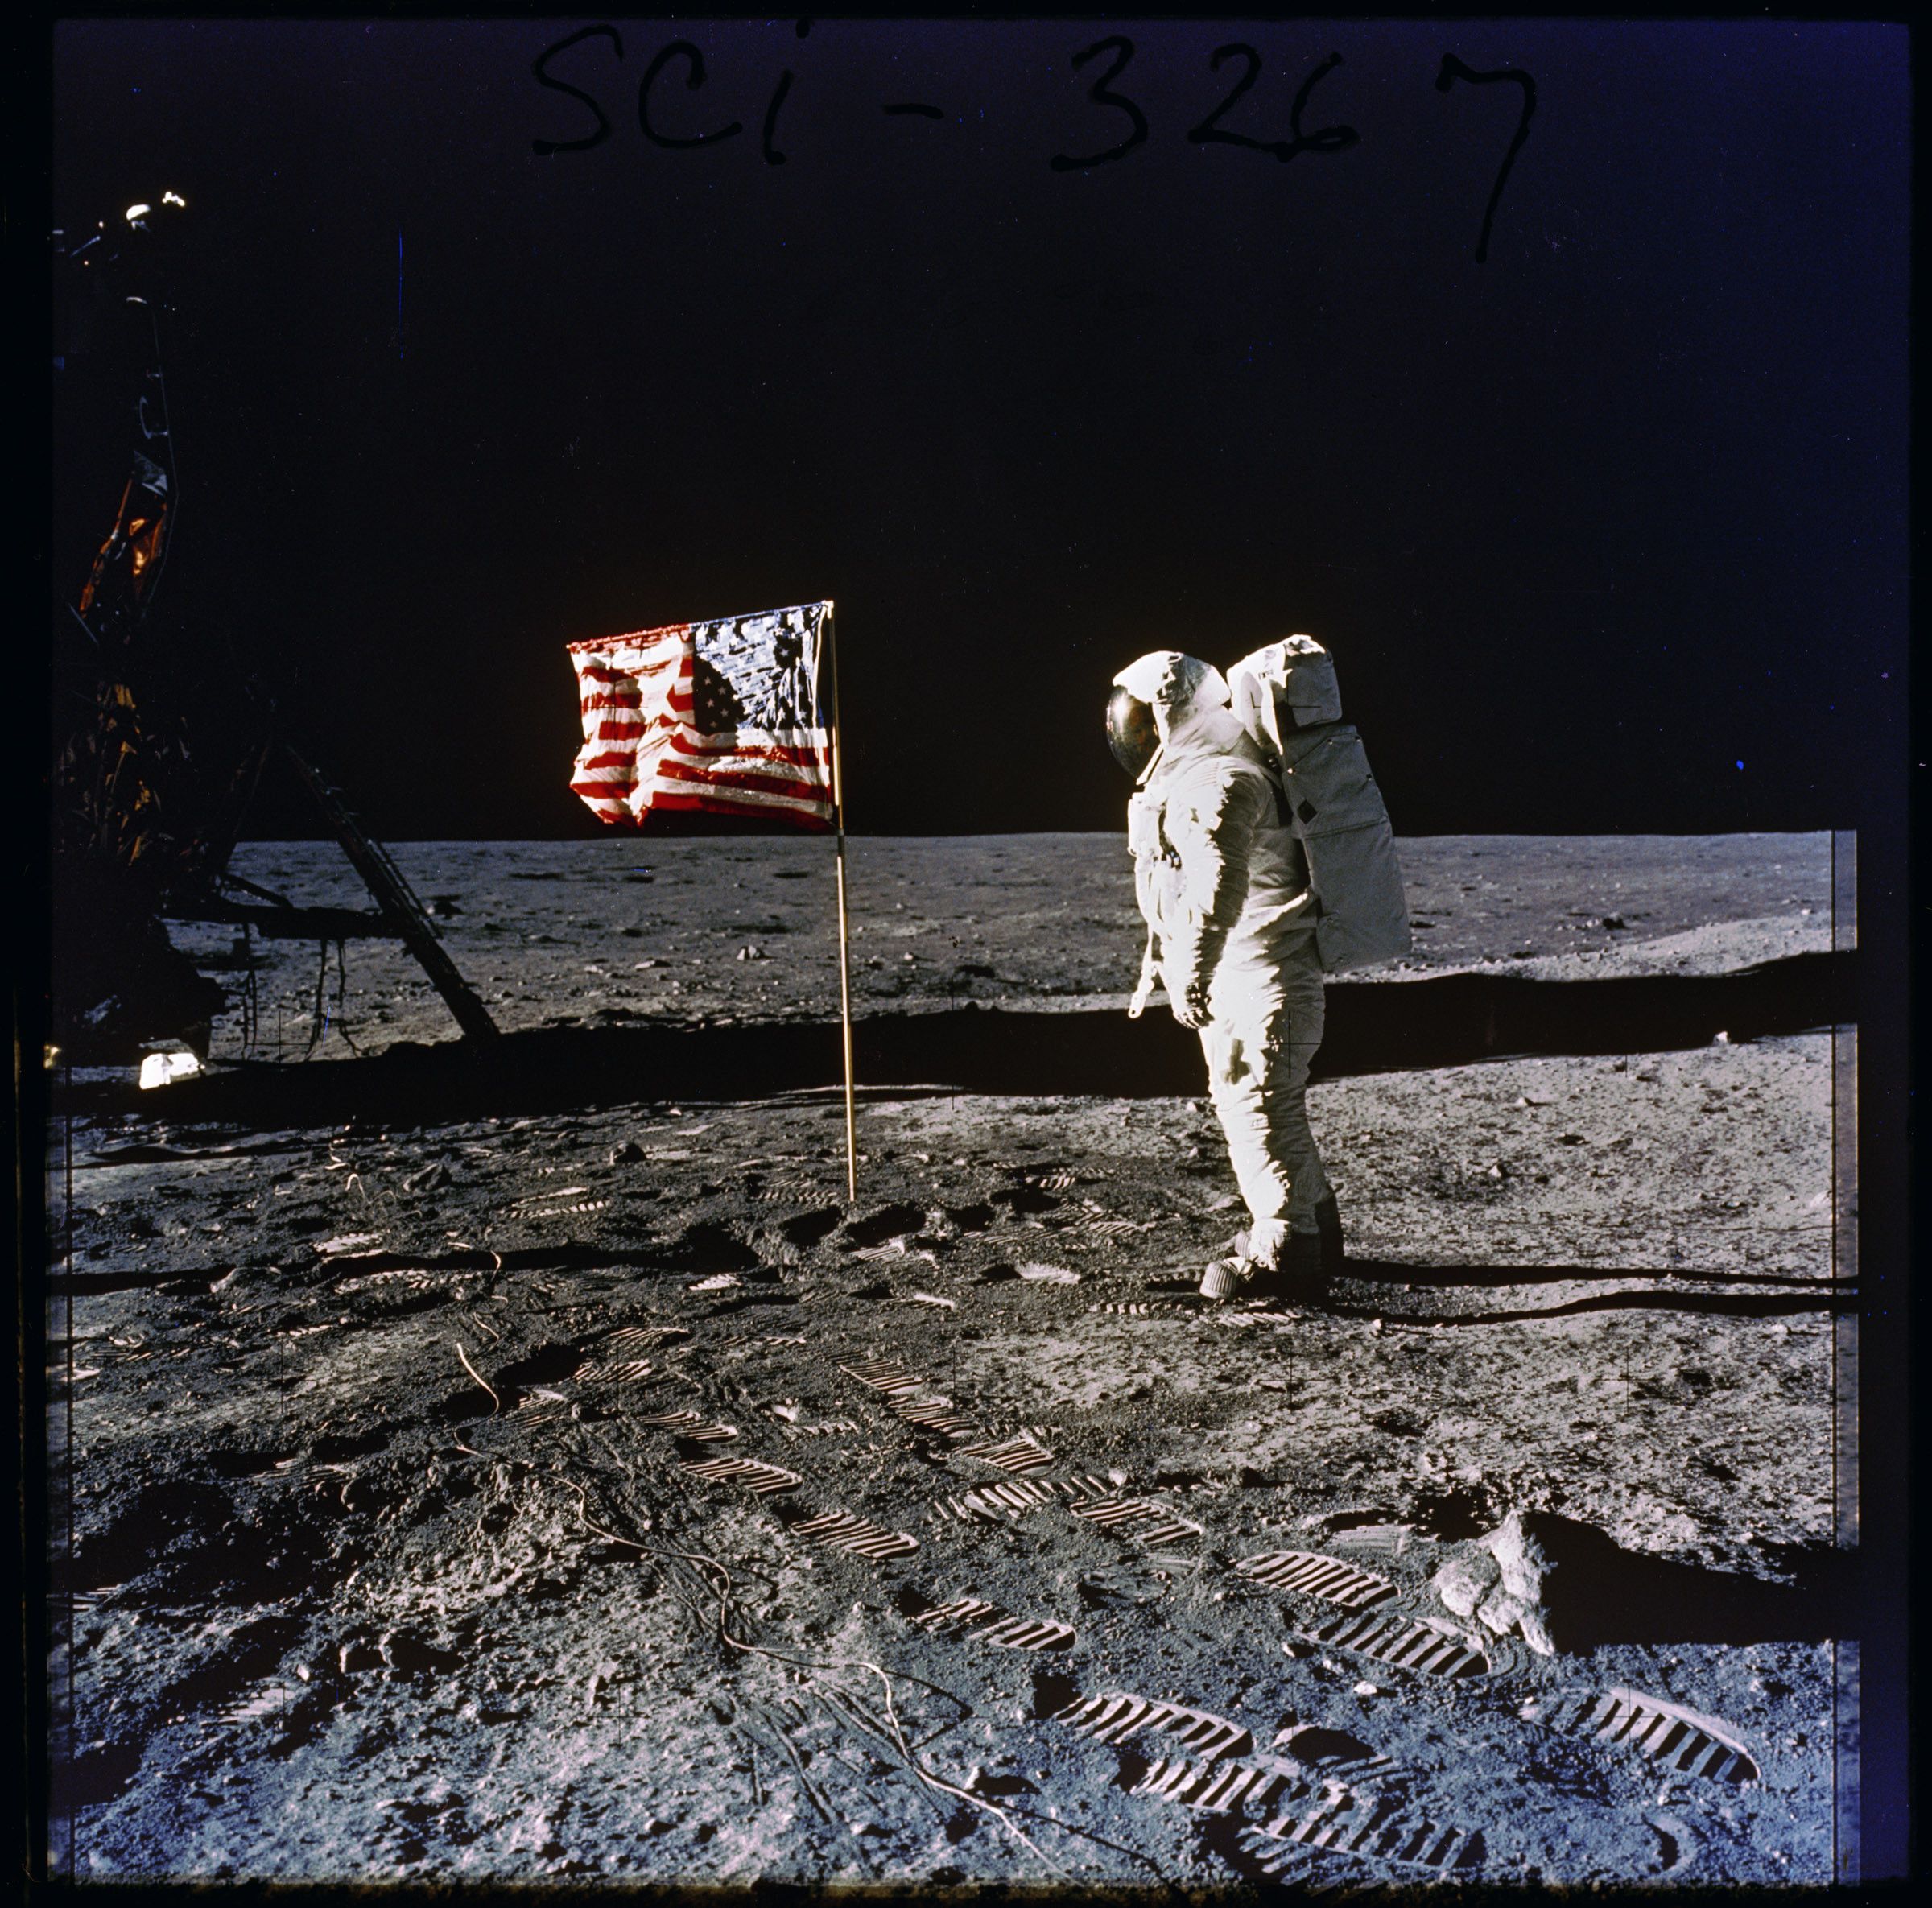 History By Mail - Apollo 11 Astronaut Edwin Aldrin posed on moon next to an American flag on July 20, 1969.